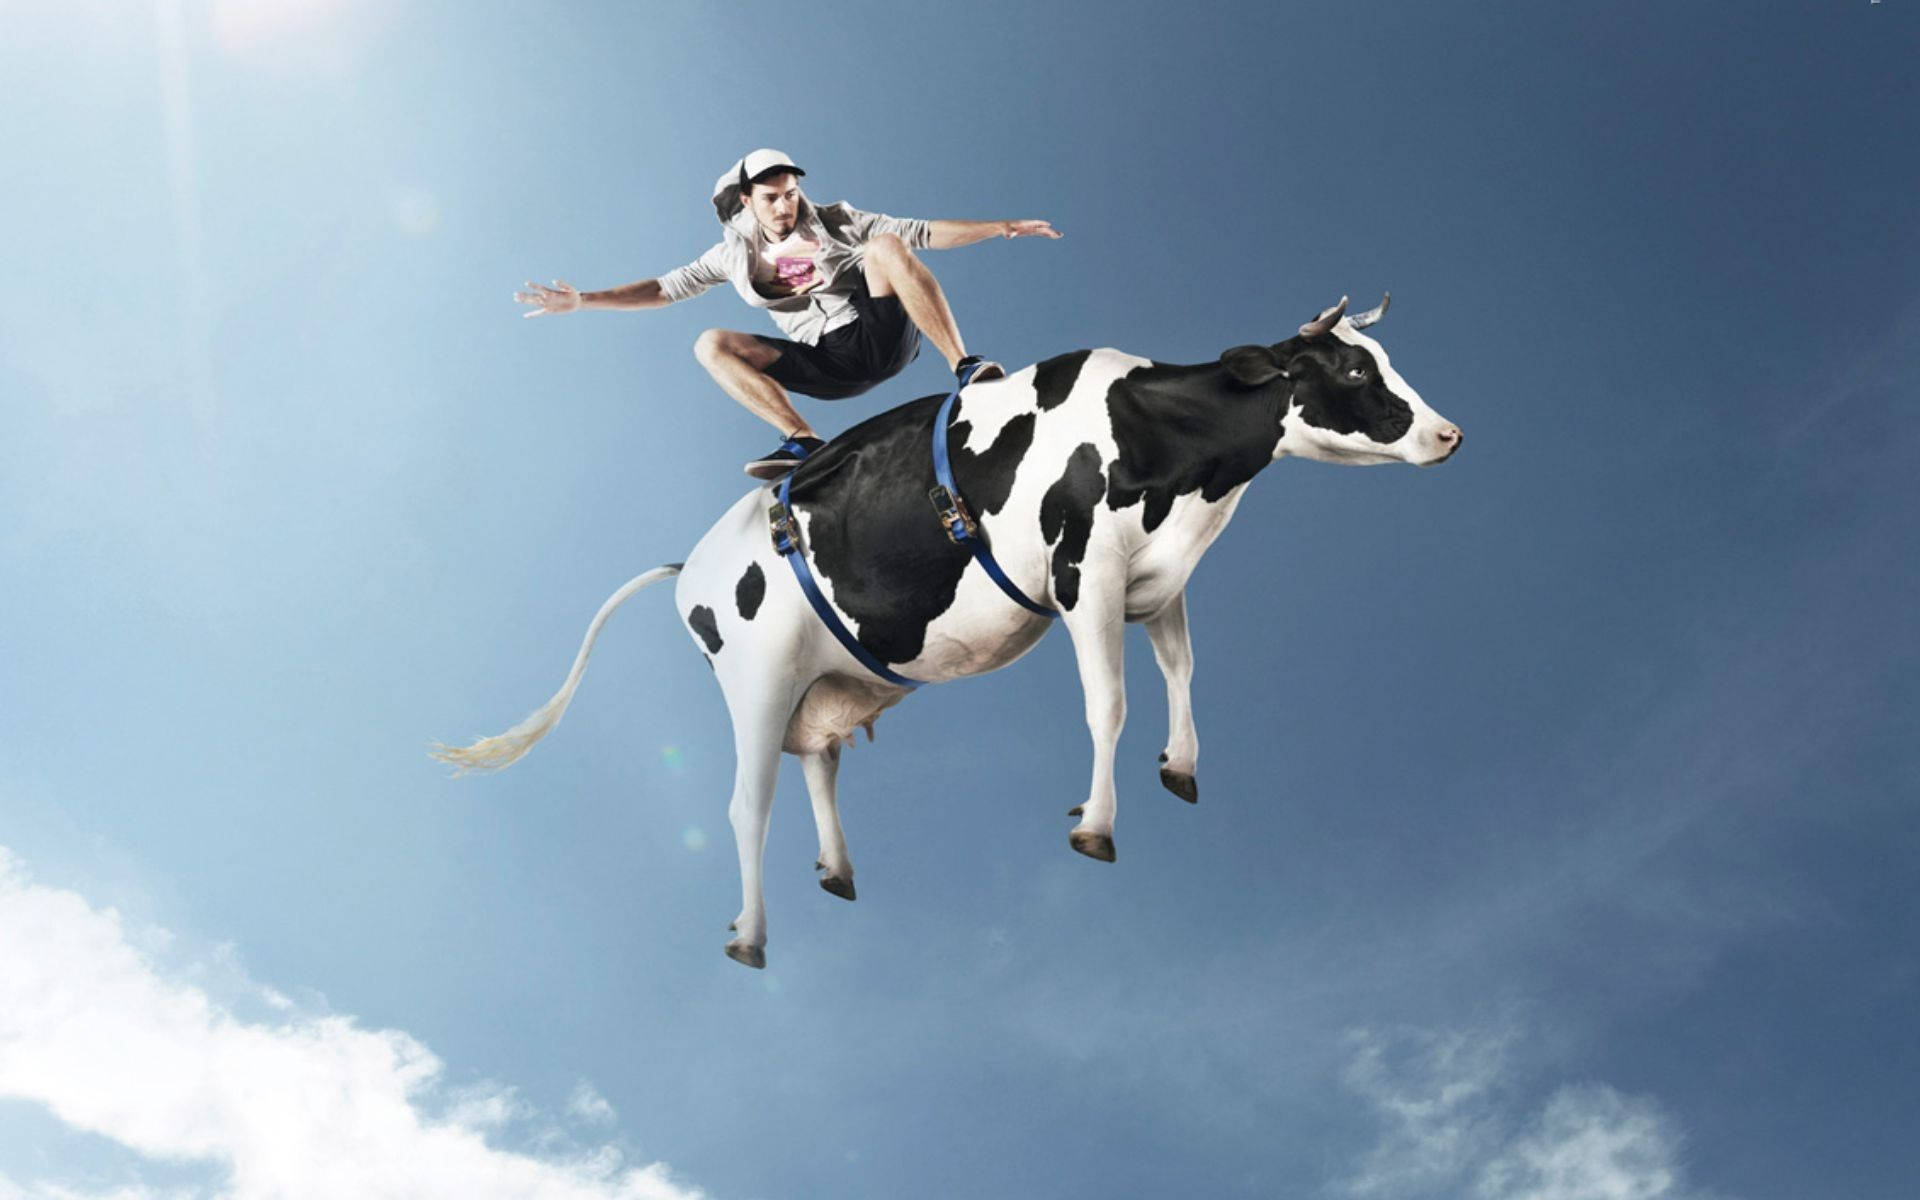 Related Keywords: Surfing, Cow, Wave, Ocean, Sea, Adventure, Surfing Cow, Brave Man, Man On Wave.